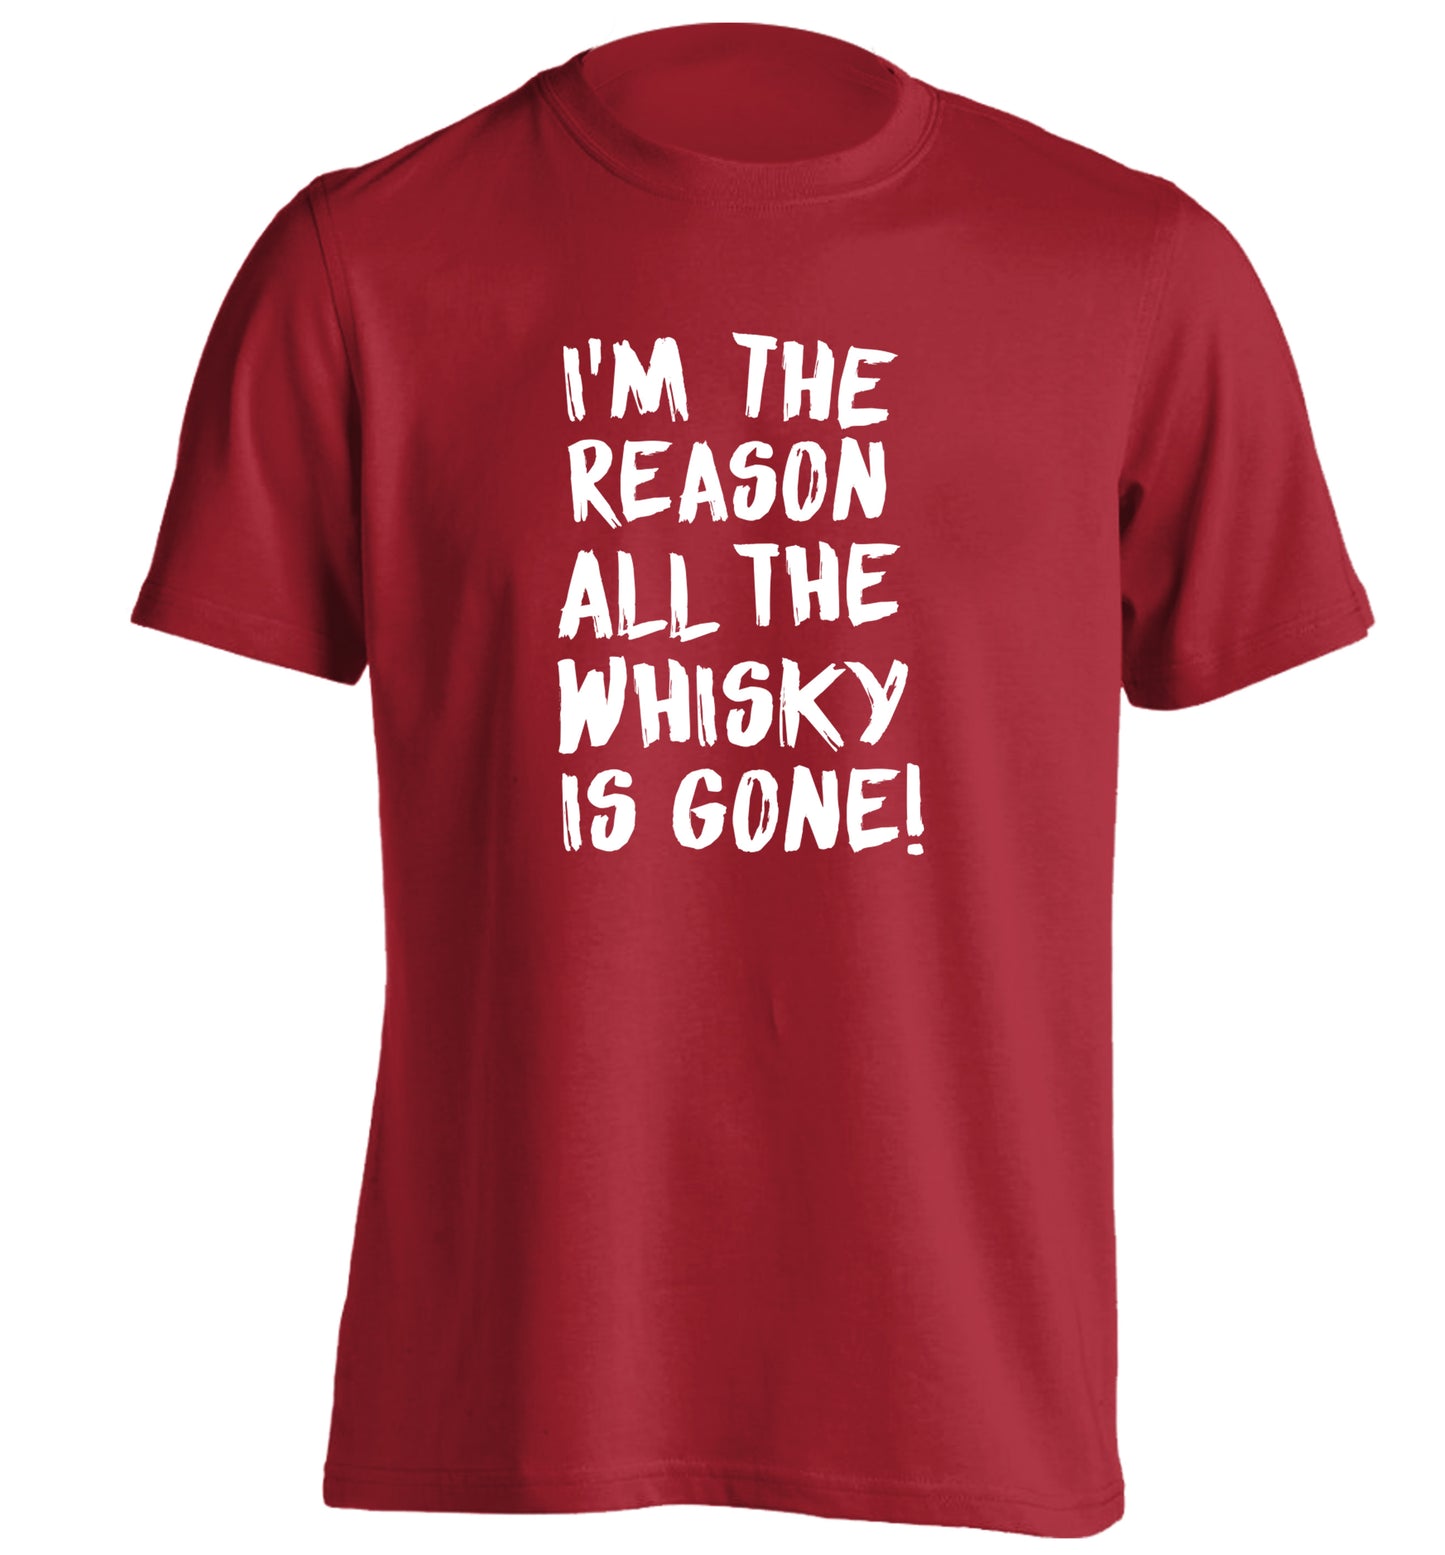 I'm the reason all the whisky is gone adults unisex red Tshirt 2XL